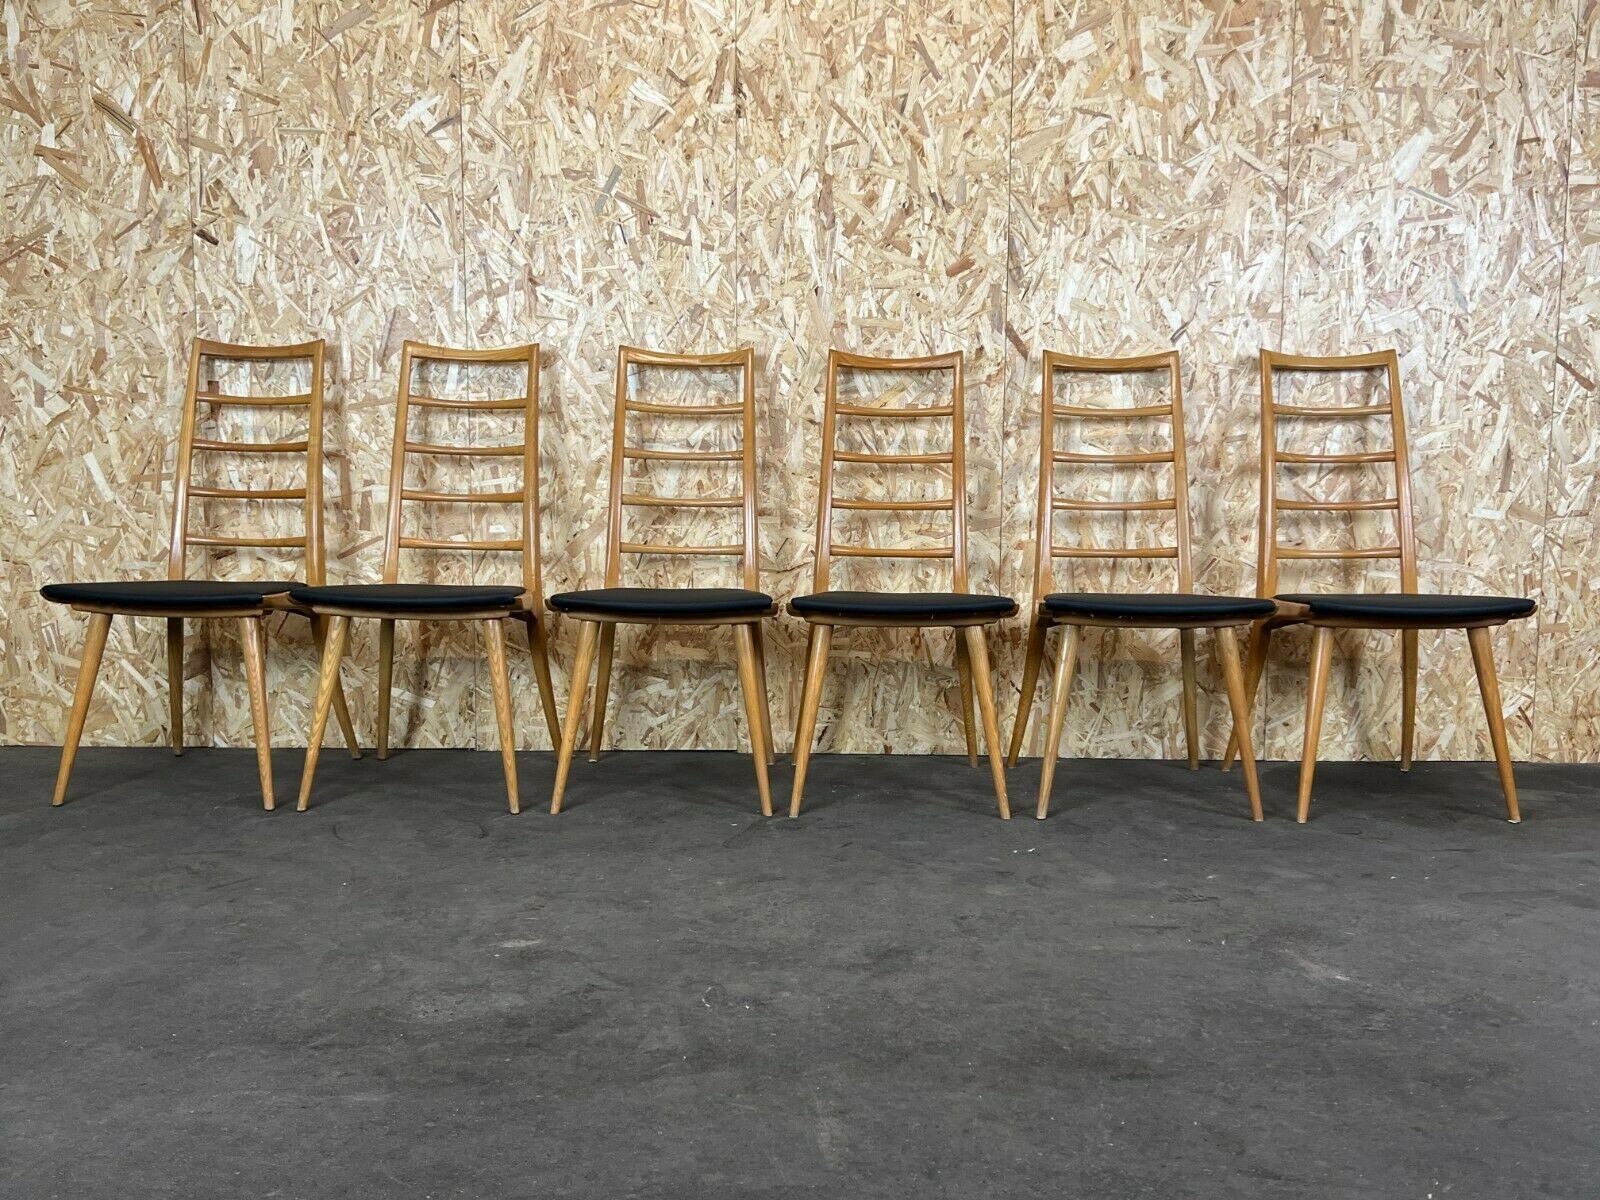 6x 60s 70s chairs chair dining chair dining chairs Danish Design 60s

Object: 6x chair

Manufacturer:

Condition: good - vintage

Age: around 1960-1970

Dimensions:

46cm x 58cm x 96.5cm
Seat height = 44cm

Other notes:

The